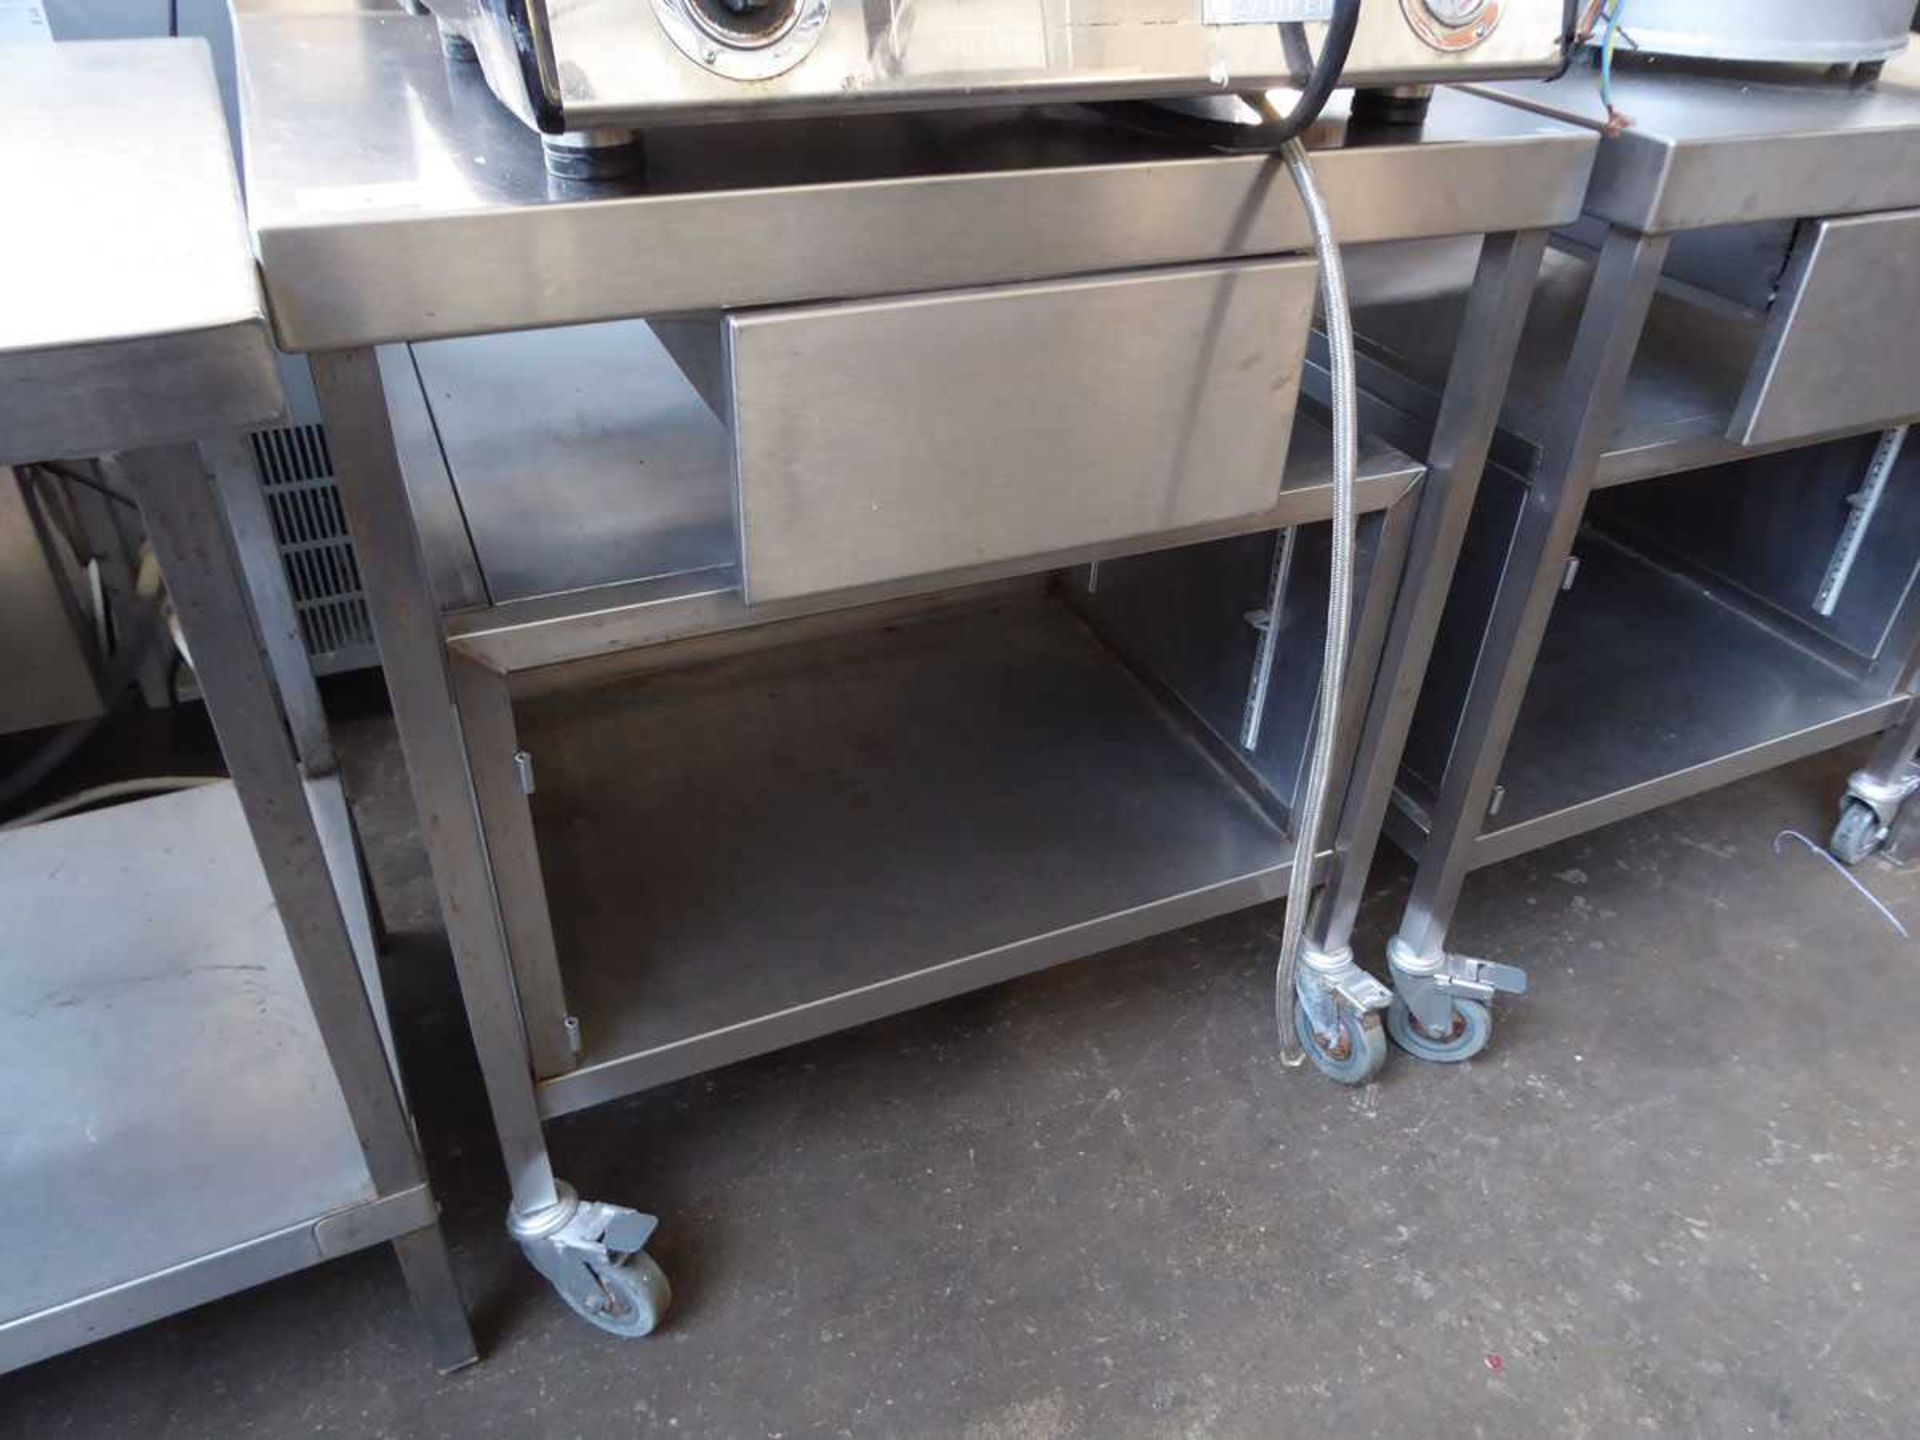 +VAT 79cm stainless steel heavy duty mobile table with a shelf and drawer under